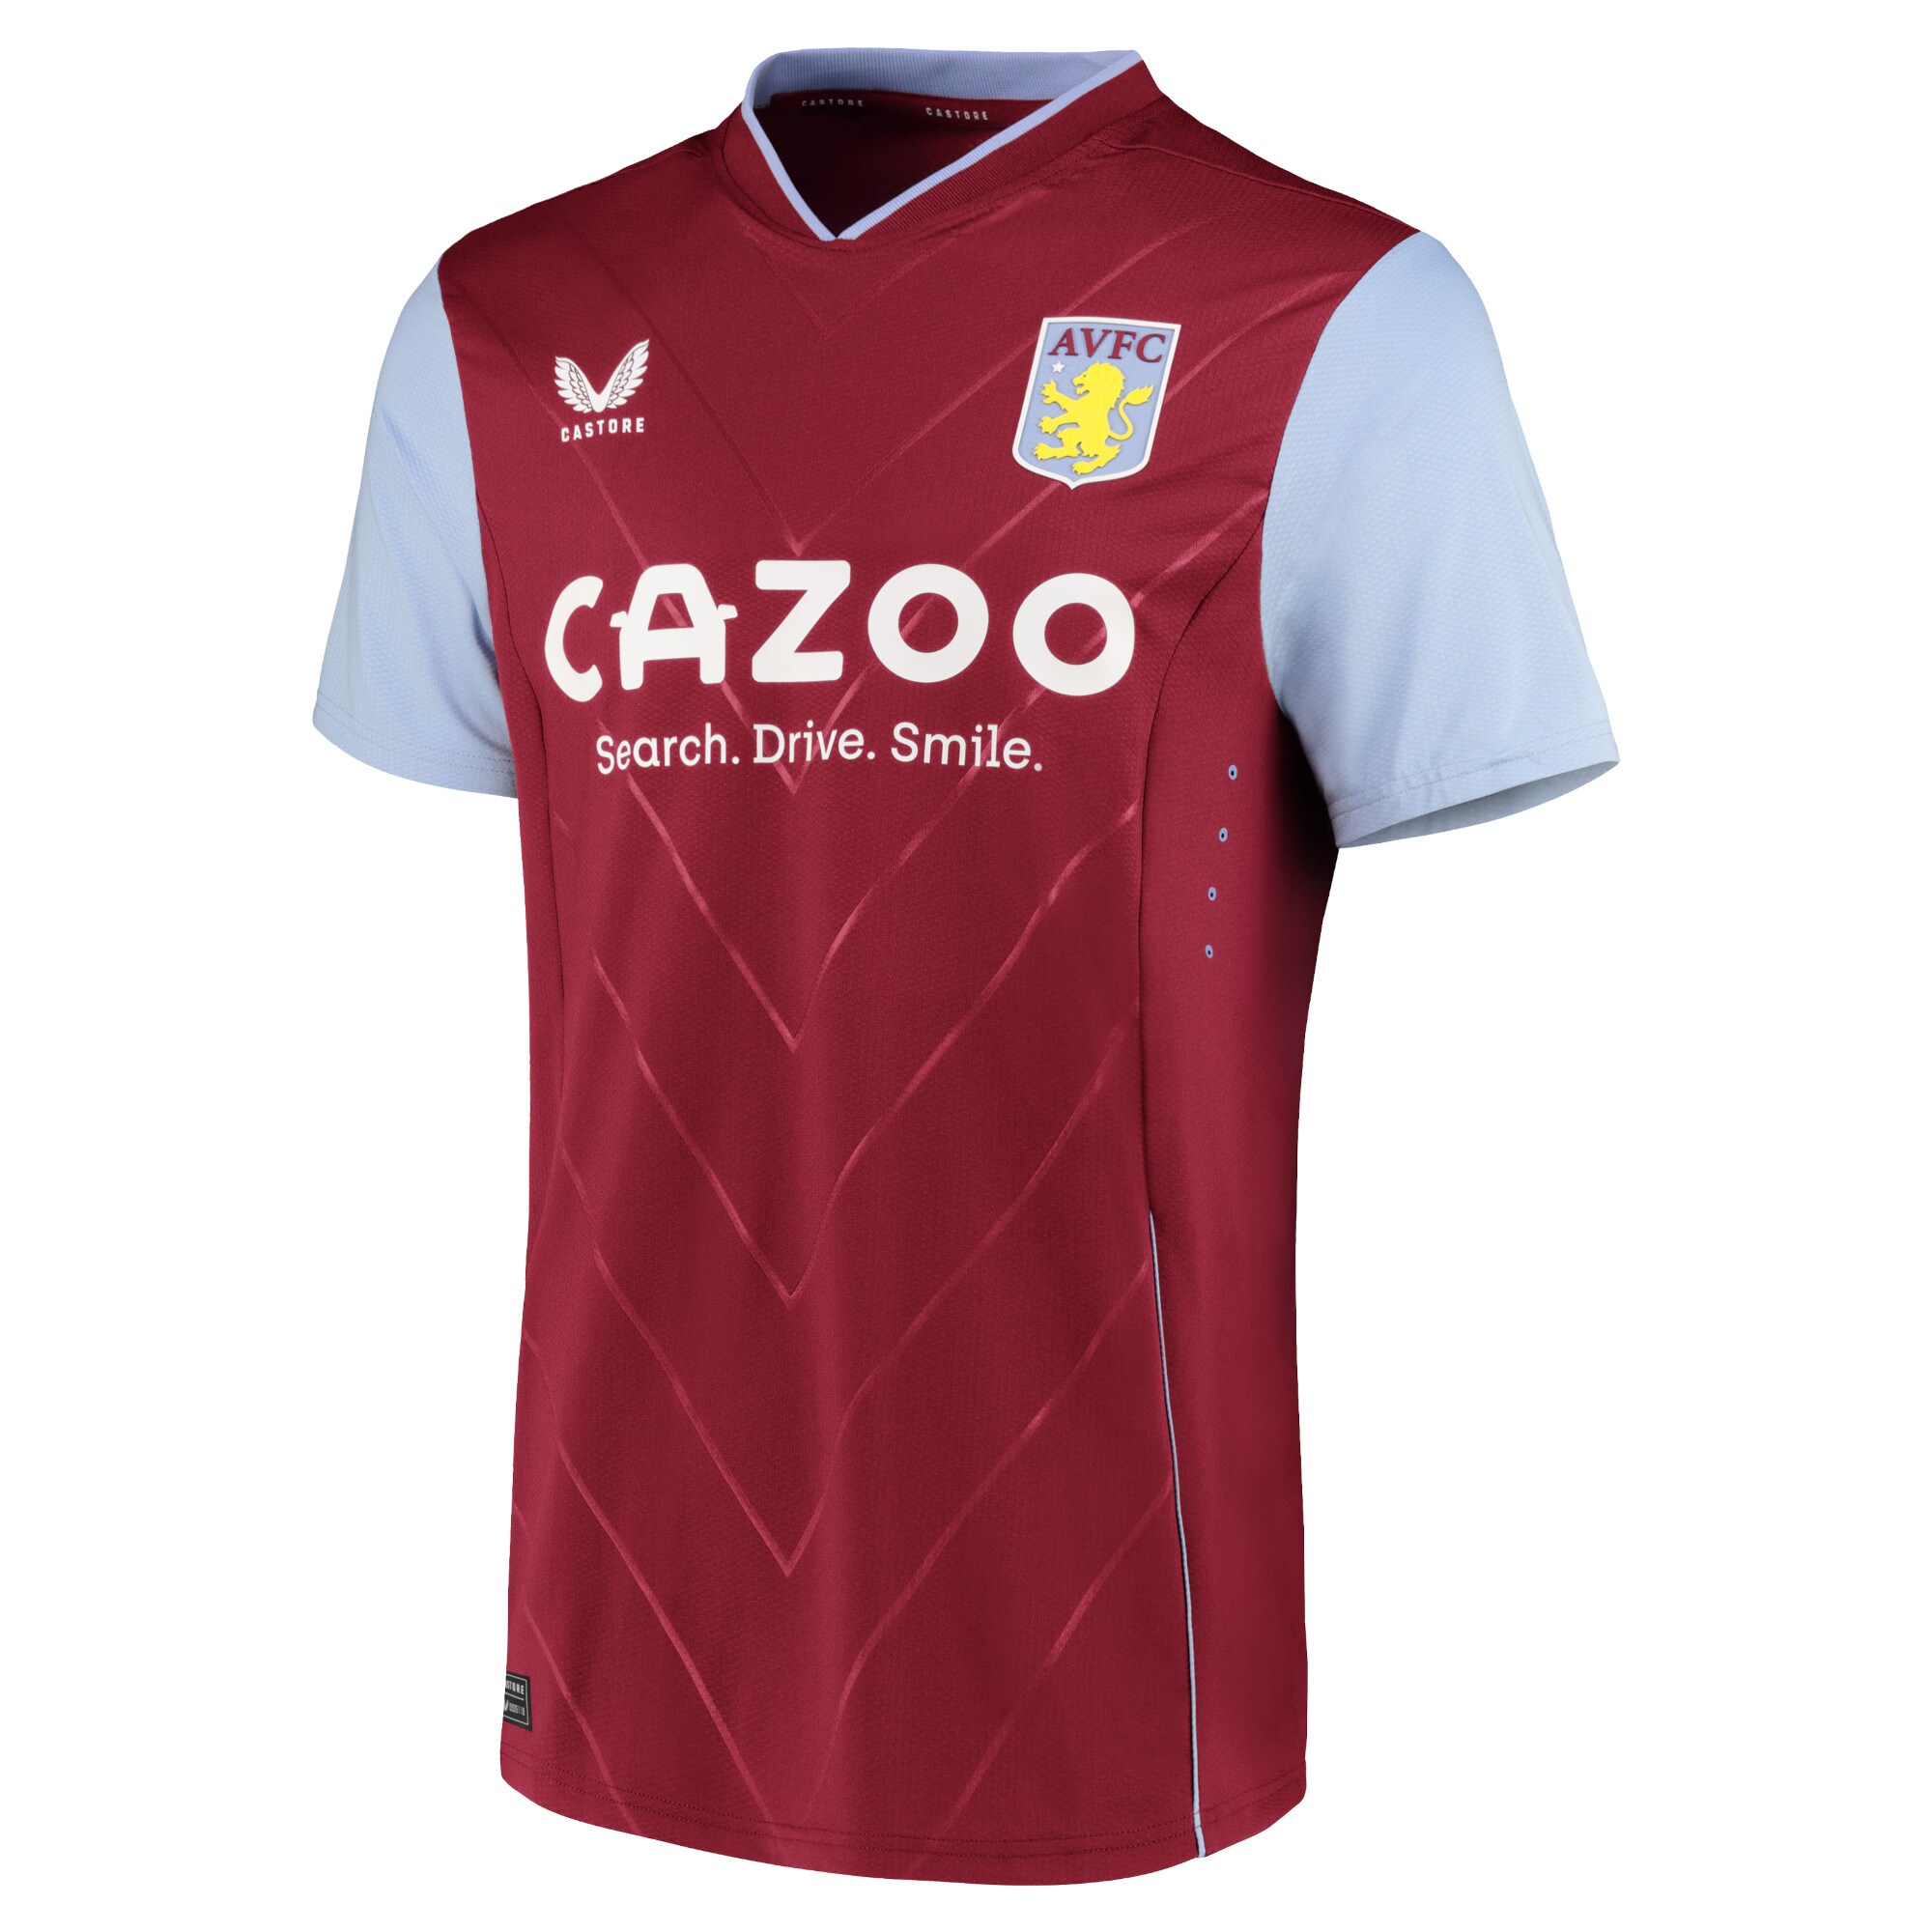 Aston Villa Cup Home Pro Shirt 2022-23 with Chambers 16 printing